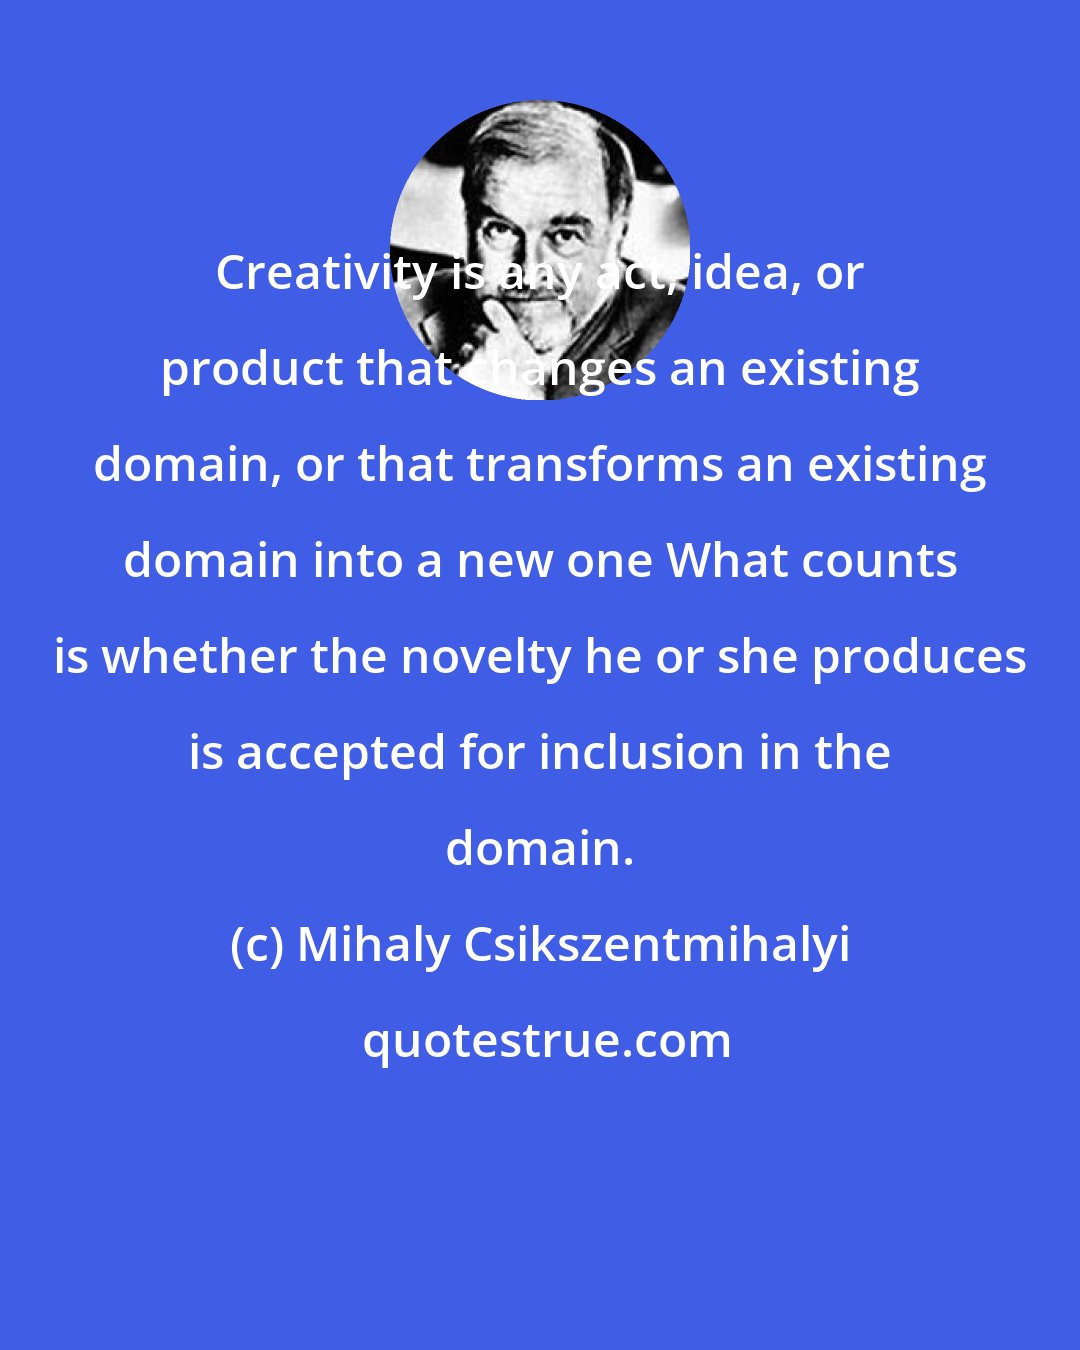 Mihaly Csikszentmihalyi: Creativity is any act, idea, or product that changes an existing domain, or that transforms an existing domain into a new one What counts is whether the novelty he or she produces is accepted for inclusion in the domain.